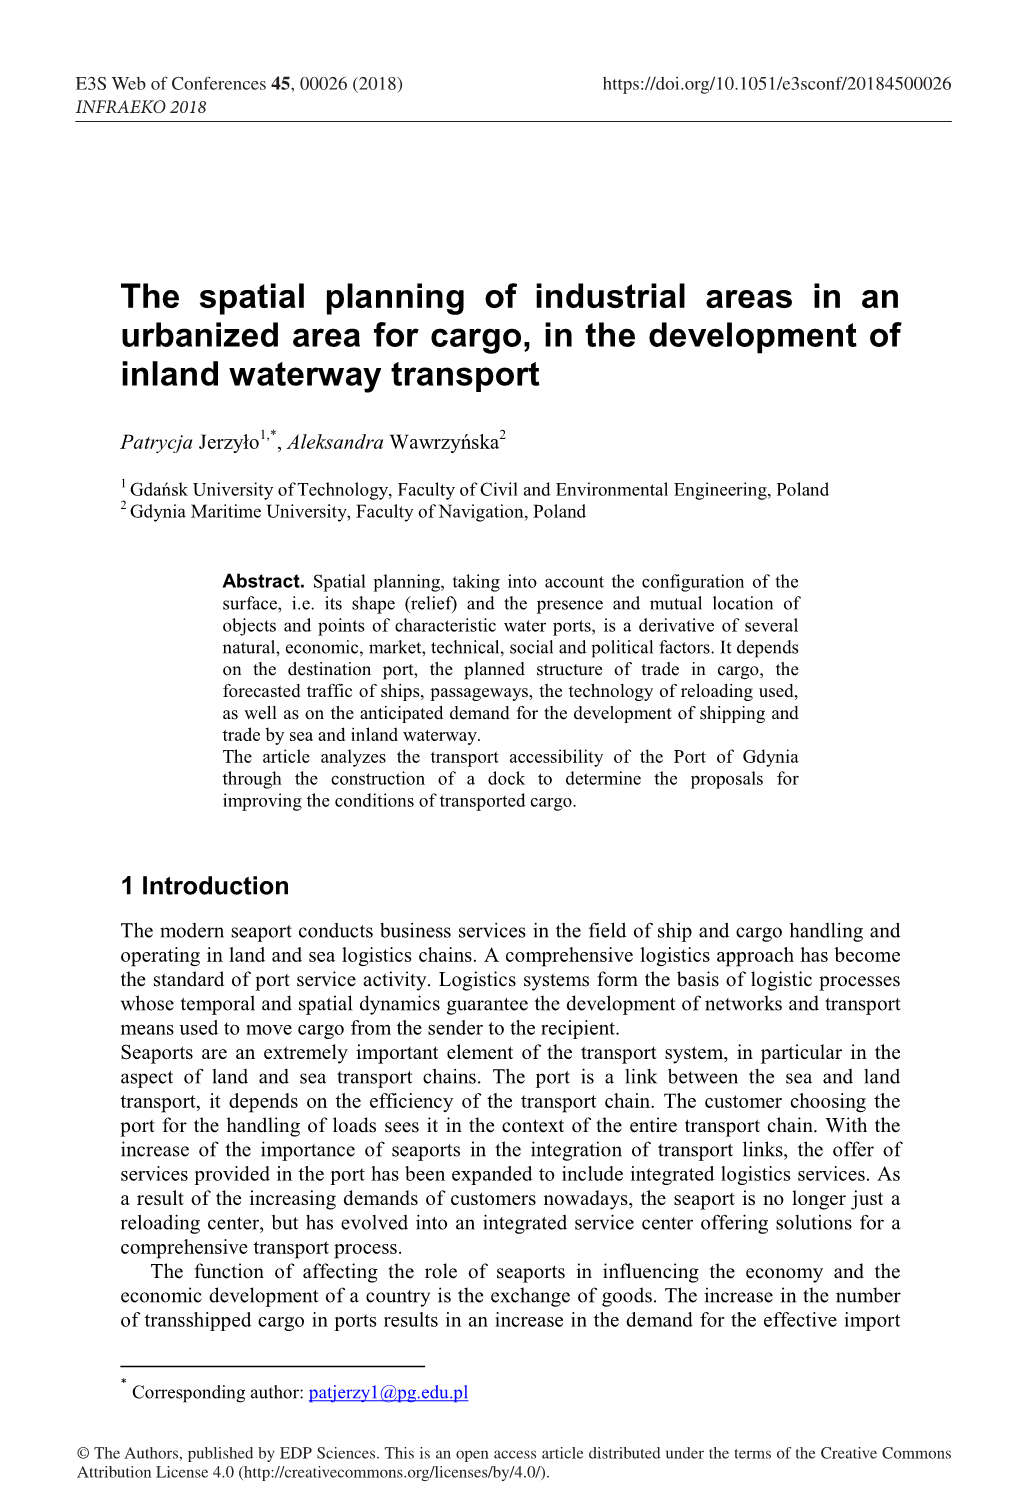 The Spatial Planning of Industrial Areas in an Urbanized Area for Cargo, in the Development of Inland Waterway Transport